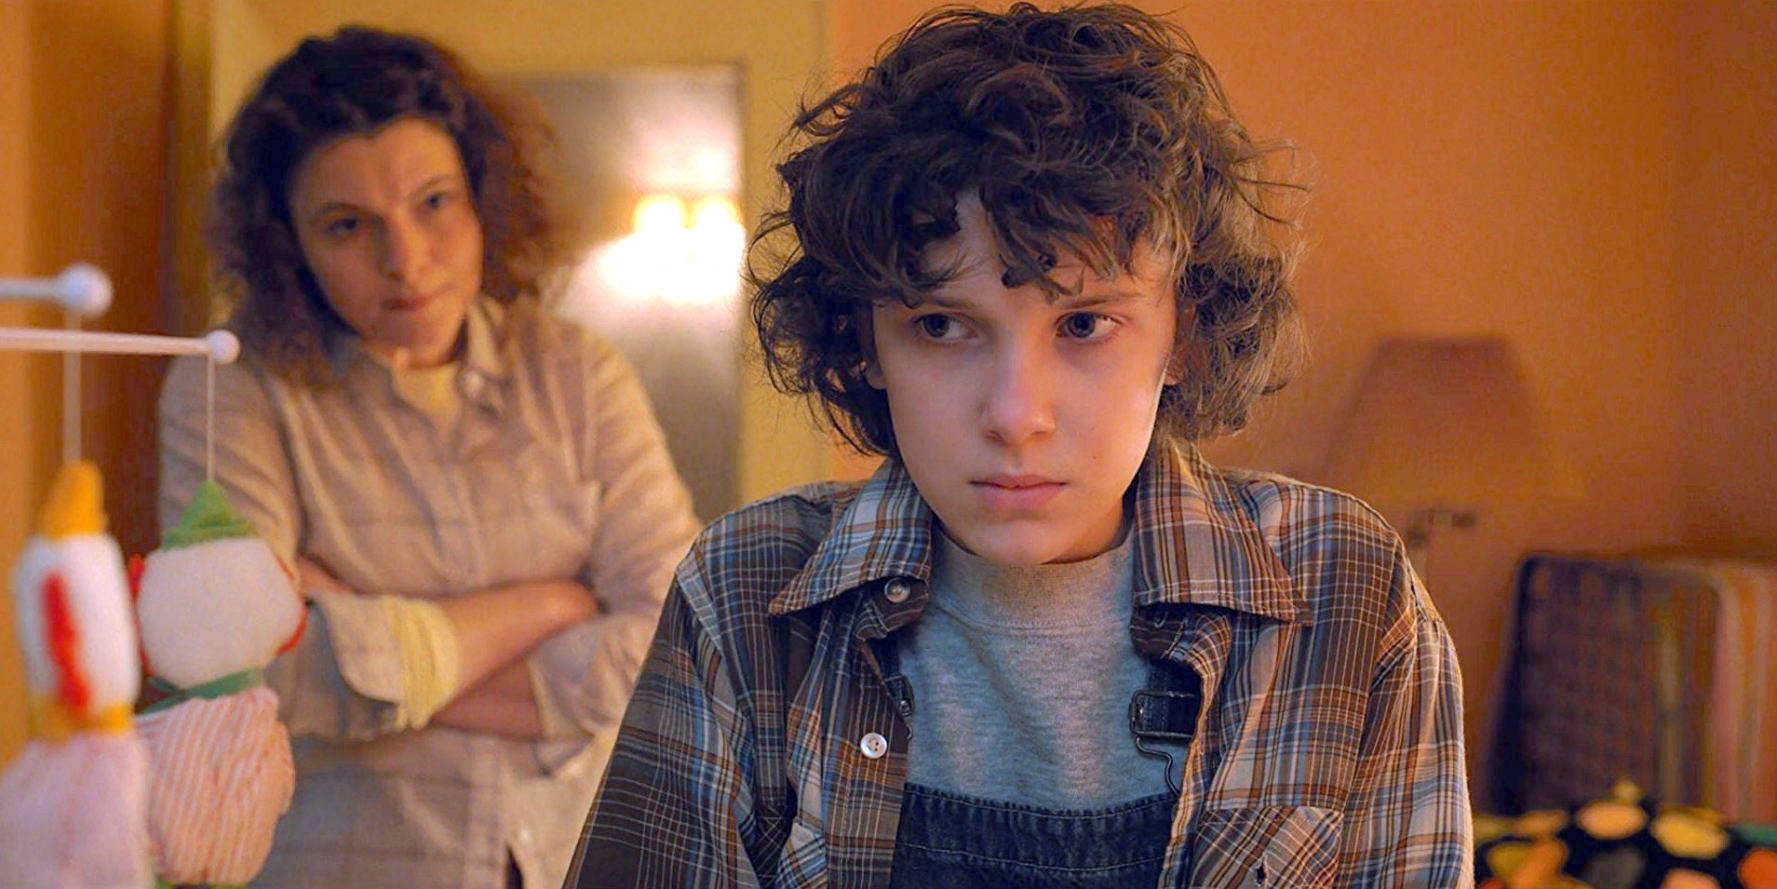 PHOTO: Amy Seimetz and Millie Bobby Brown in "Stranger Things," 2016.